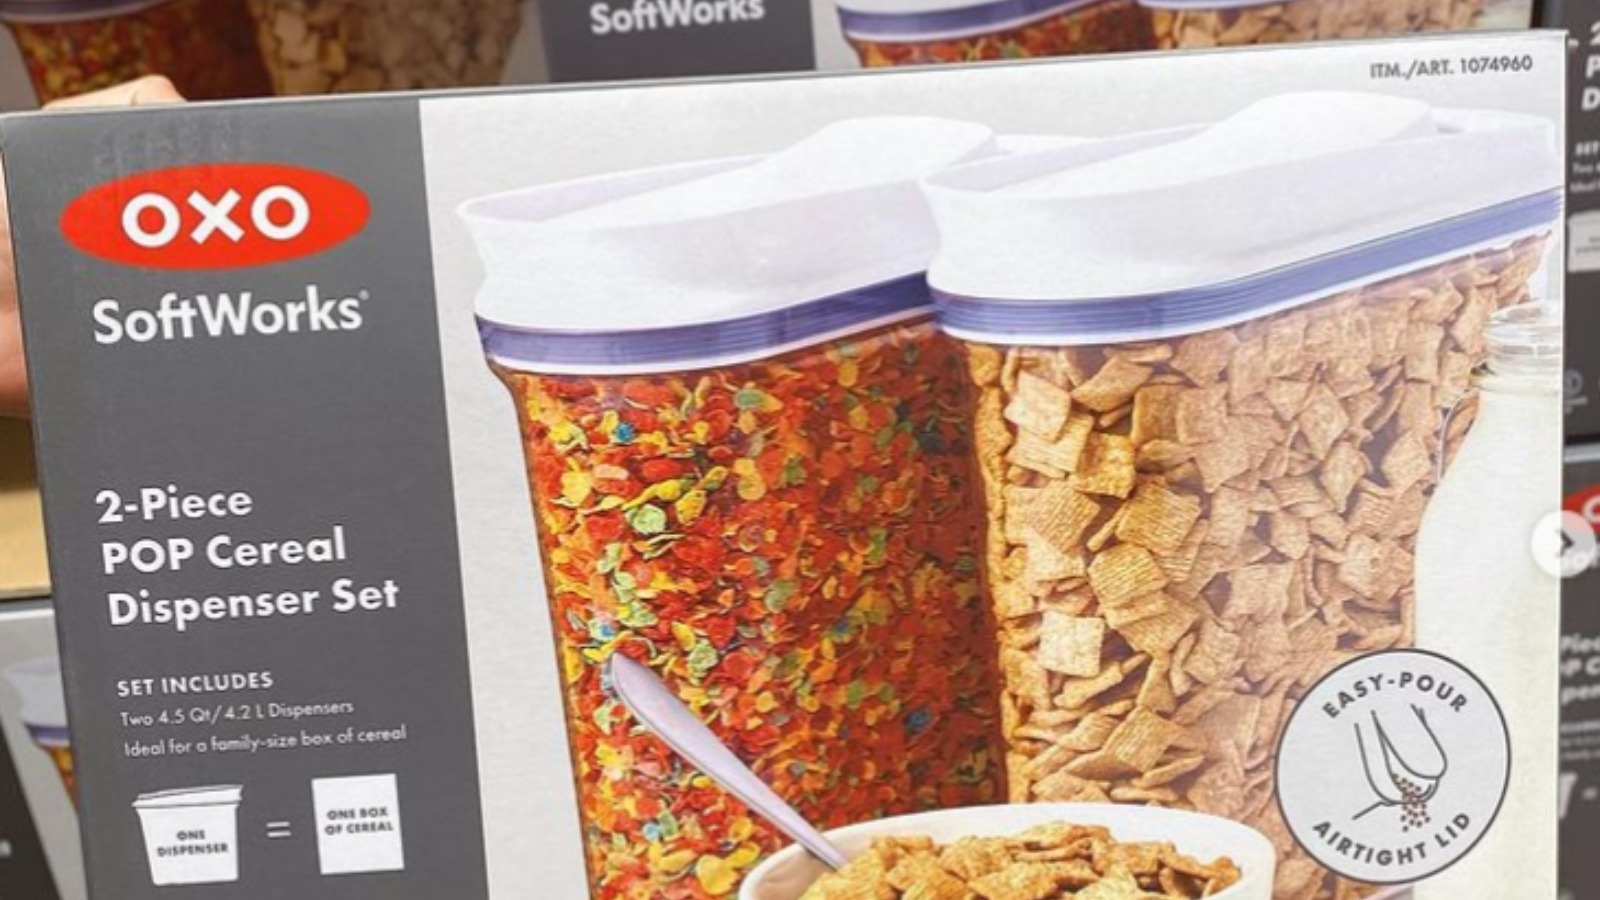 https://www.mashed.com/img/gallery/this-cereal-dispenser-set-at-costco-is-perfect-for-families/l-intro-1623077726.jpg